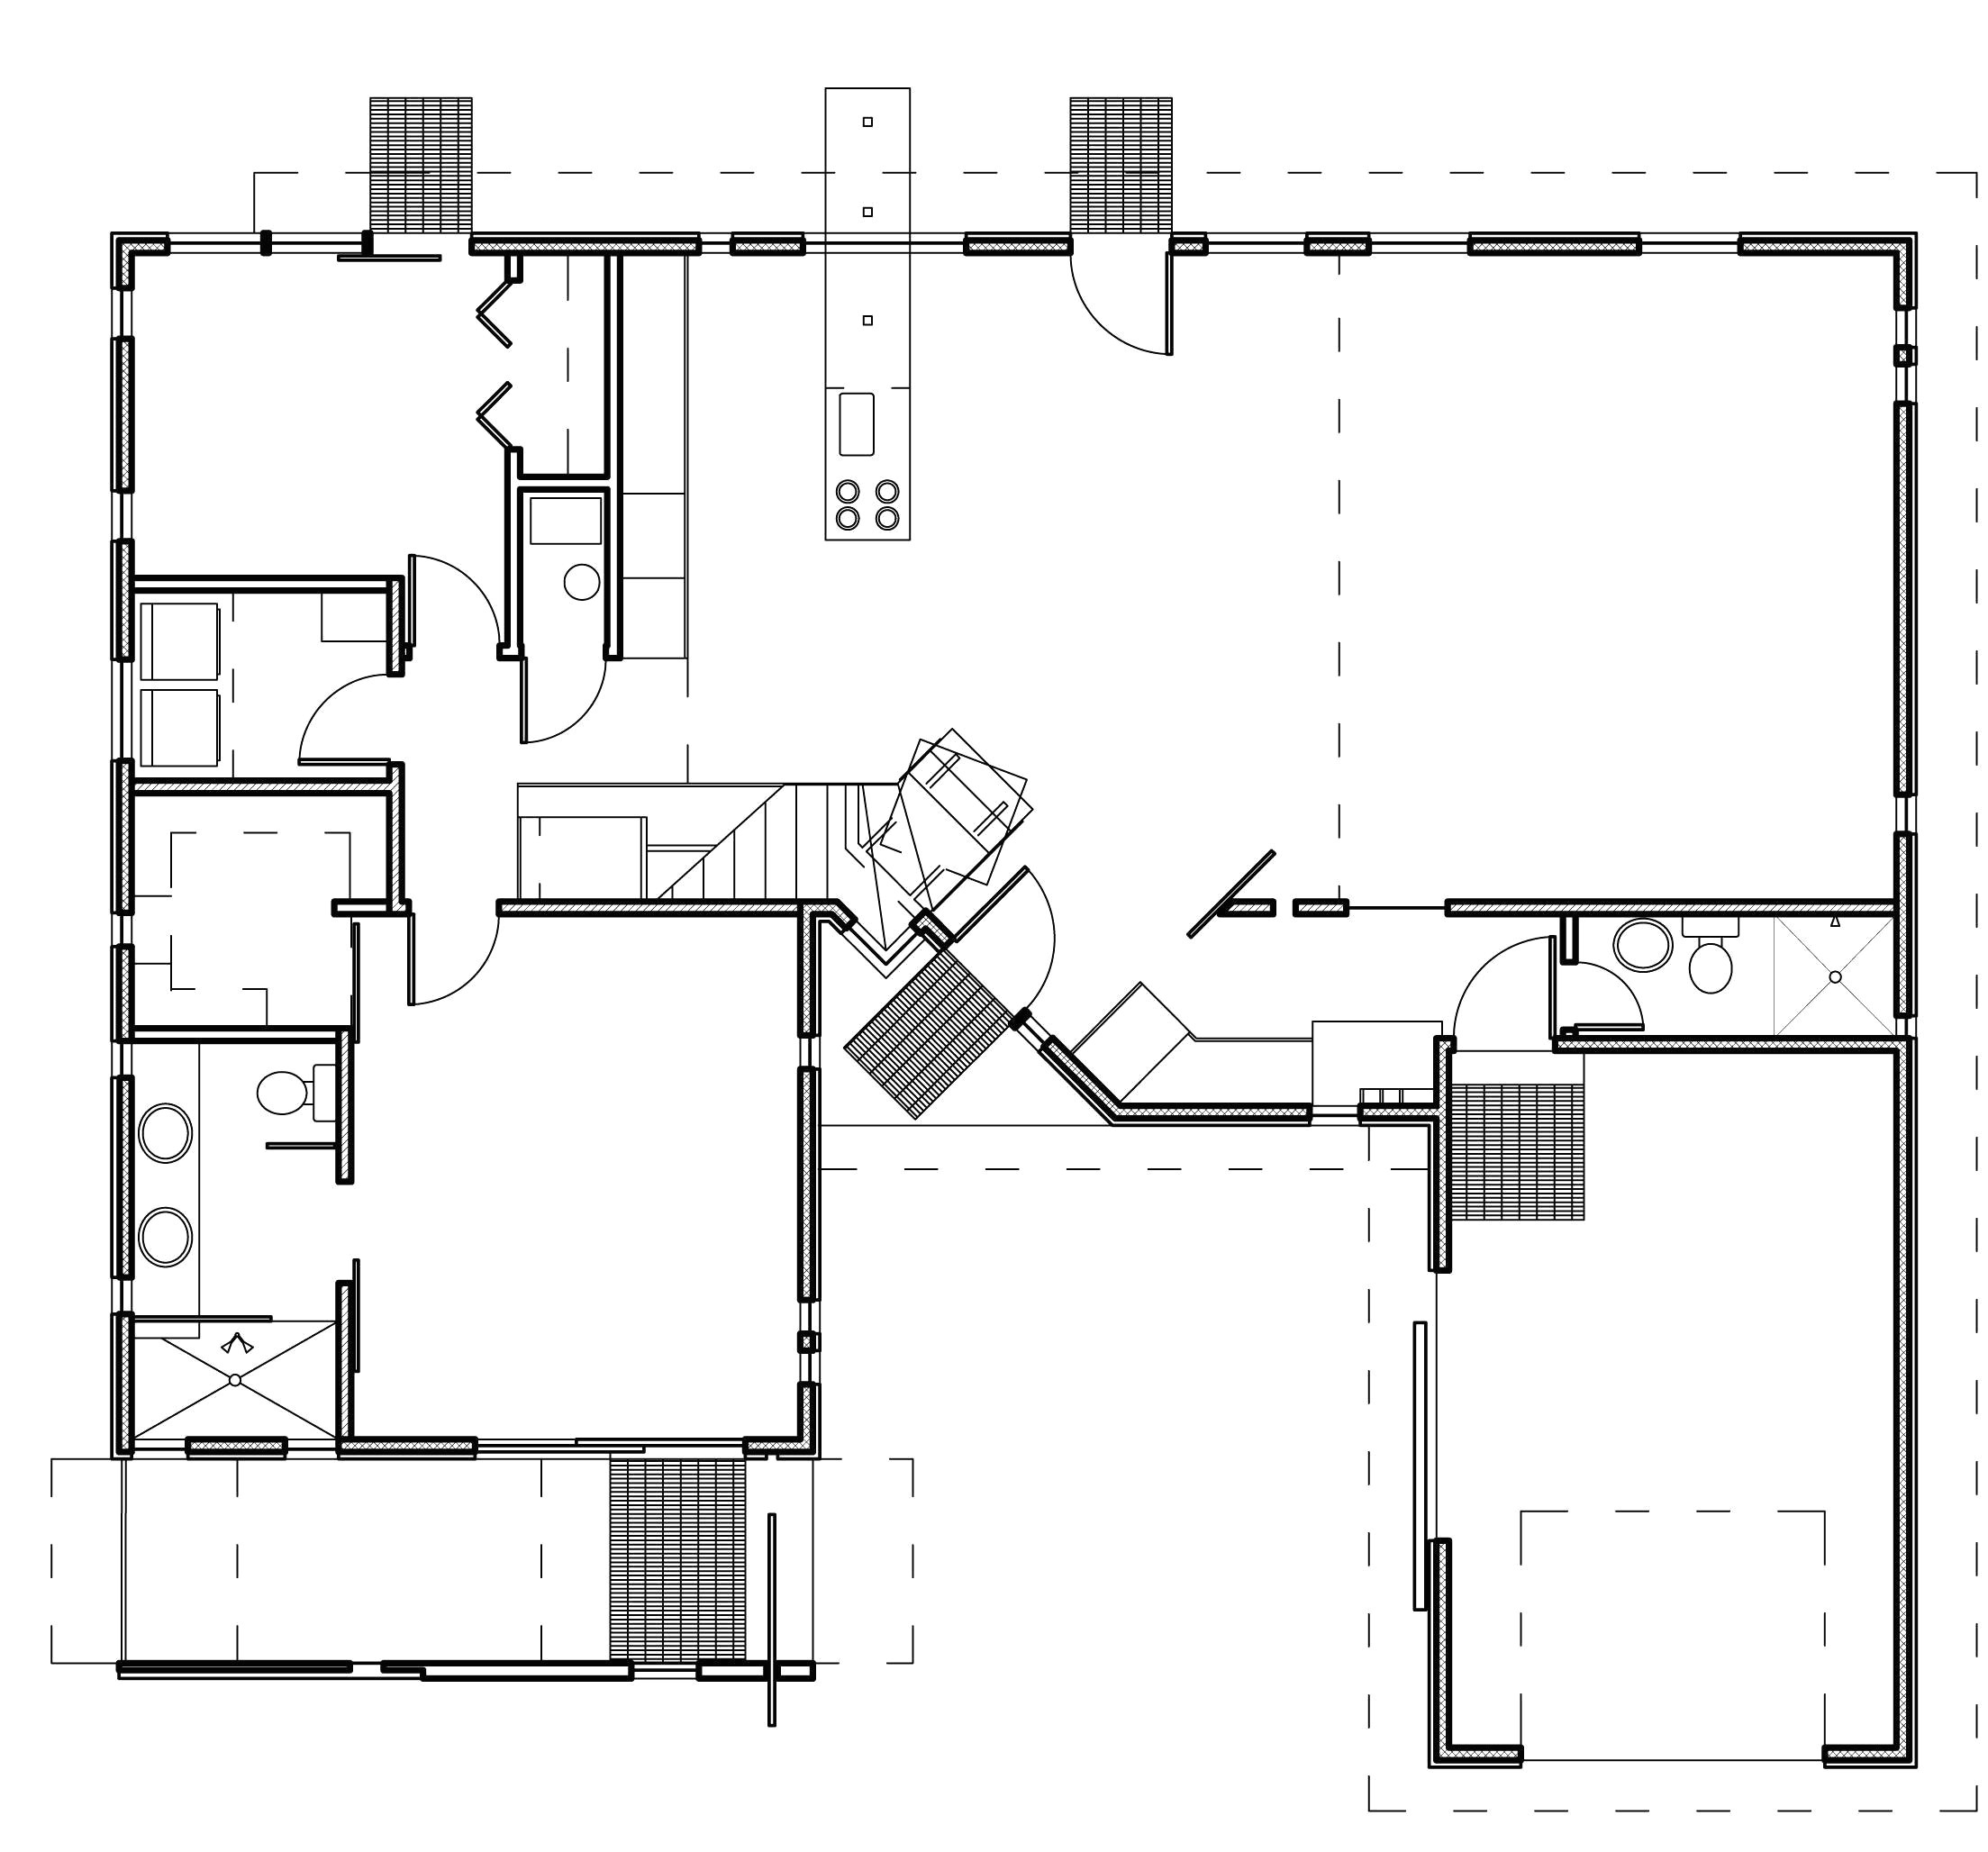 19 inspirational how to draw a floor plan how to draw a floor plan lovely what